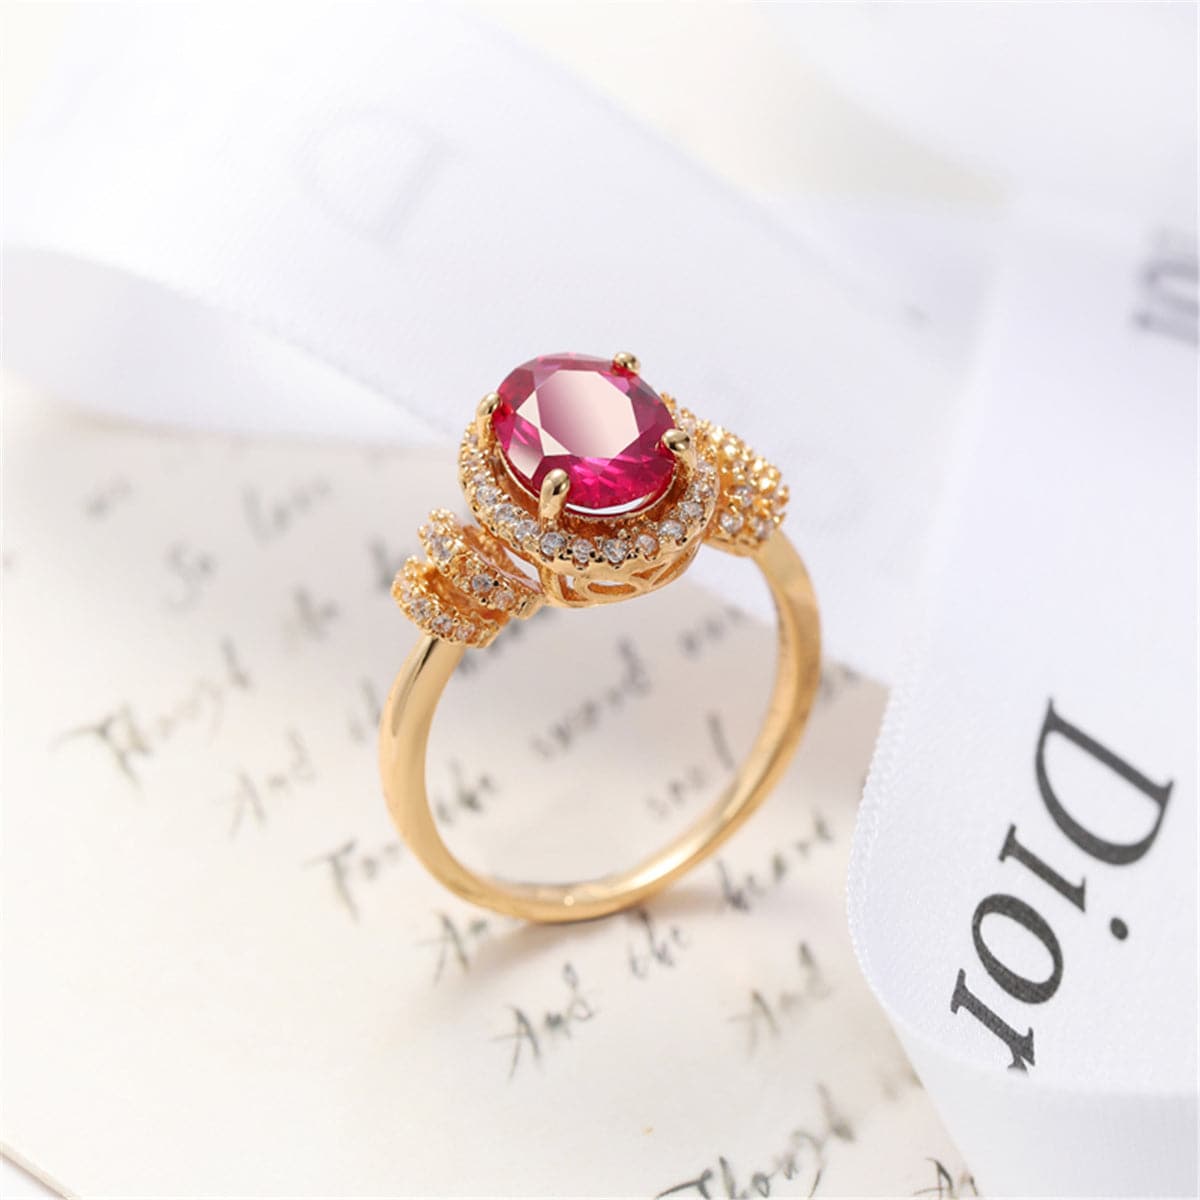 Red Crystal & Cubic Zirconia 18K Gold-Plated Pavé Halo Oval Ring